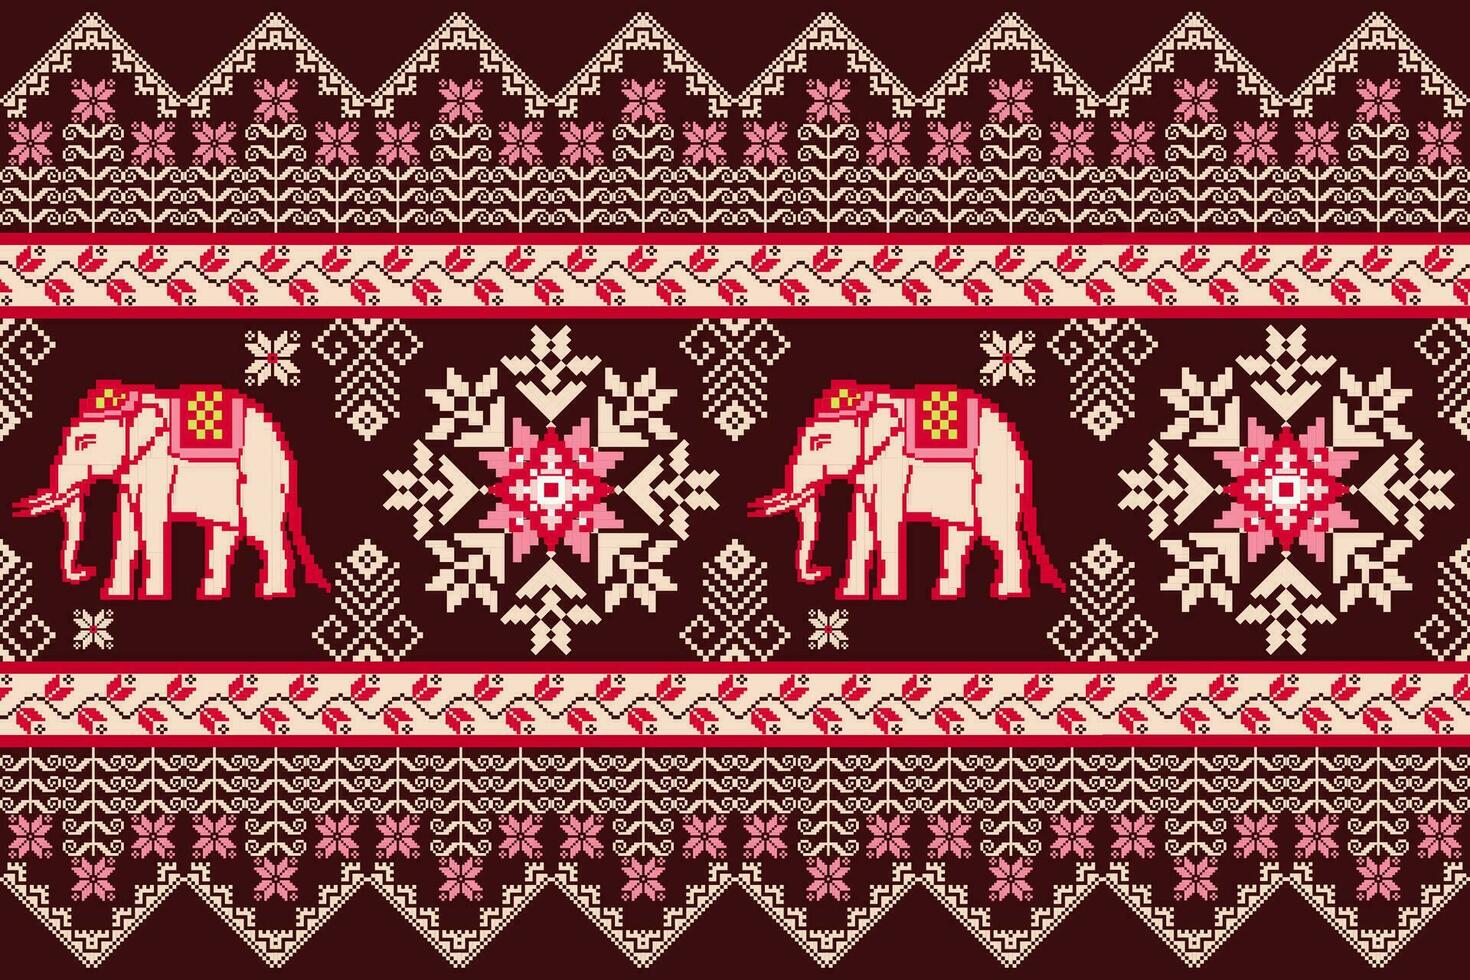 Ethnic Thai Elephant and Floral Pixel Art Seamless Pattern.  Vector Design for fabric, carpet, tile, embroidery, wallpaper, and background